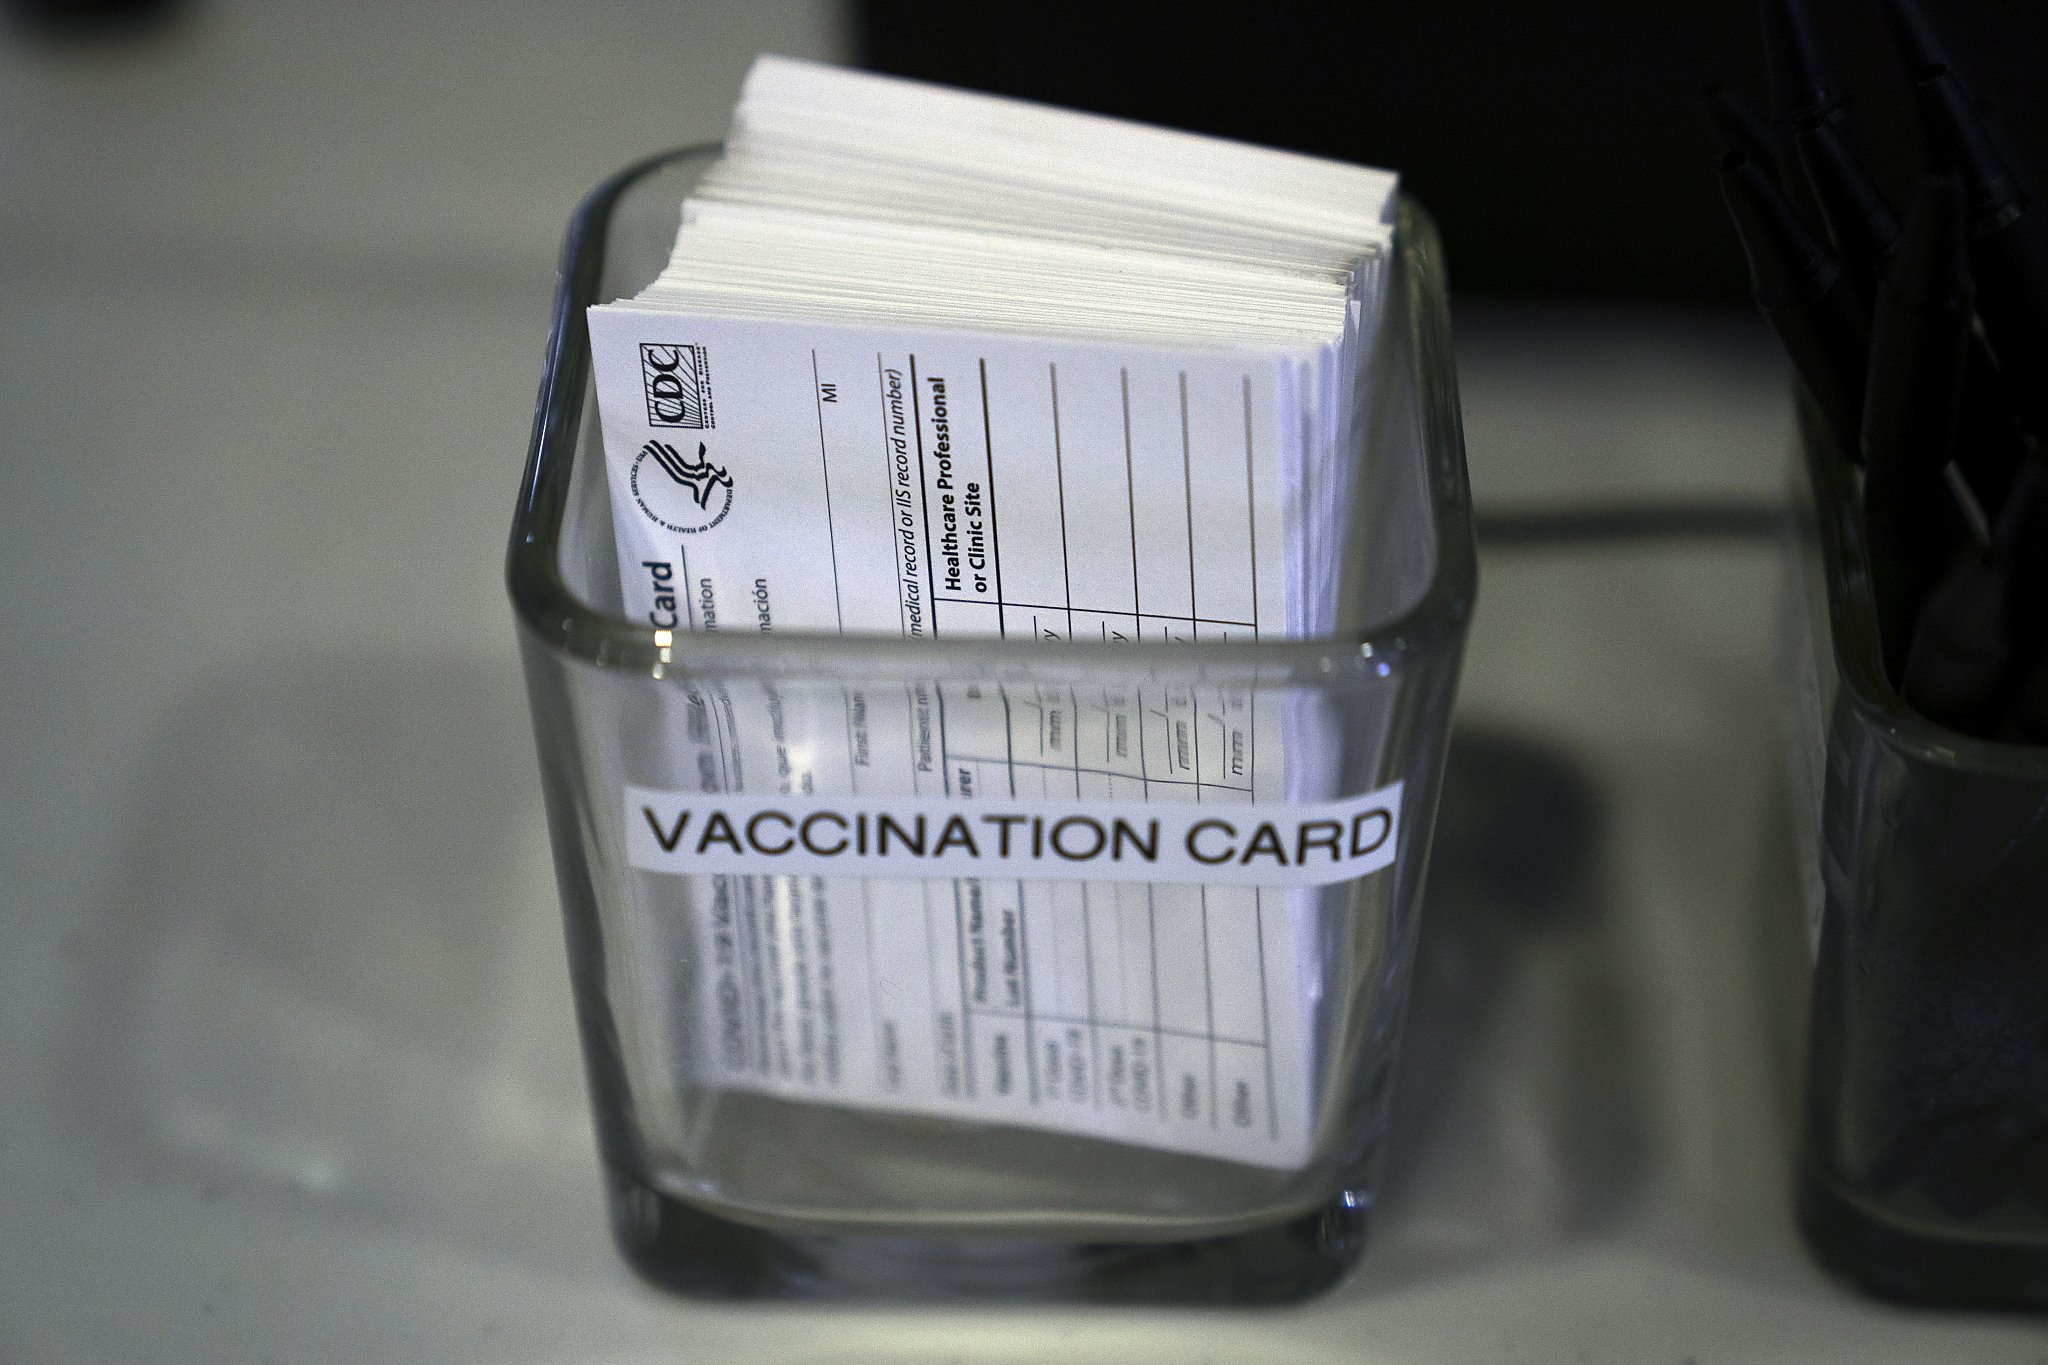 COVID-19 vaccination cards are displayed on a check-in table in Santa Ana on May 21, 2021. California will introduce a digital verification tool that 